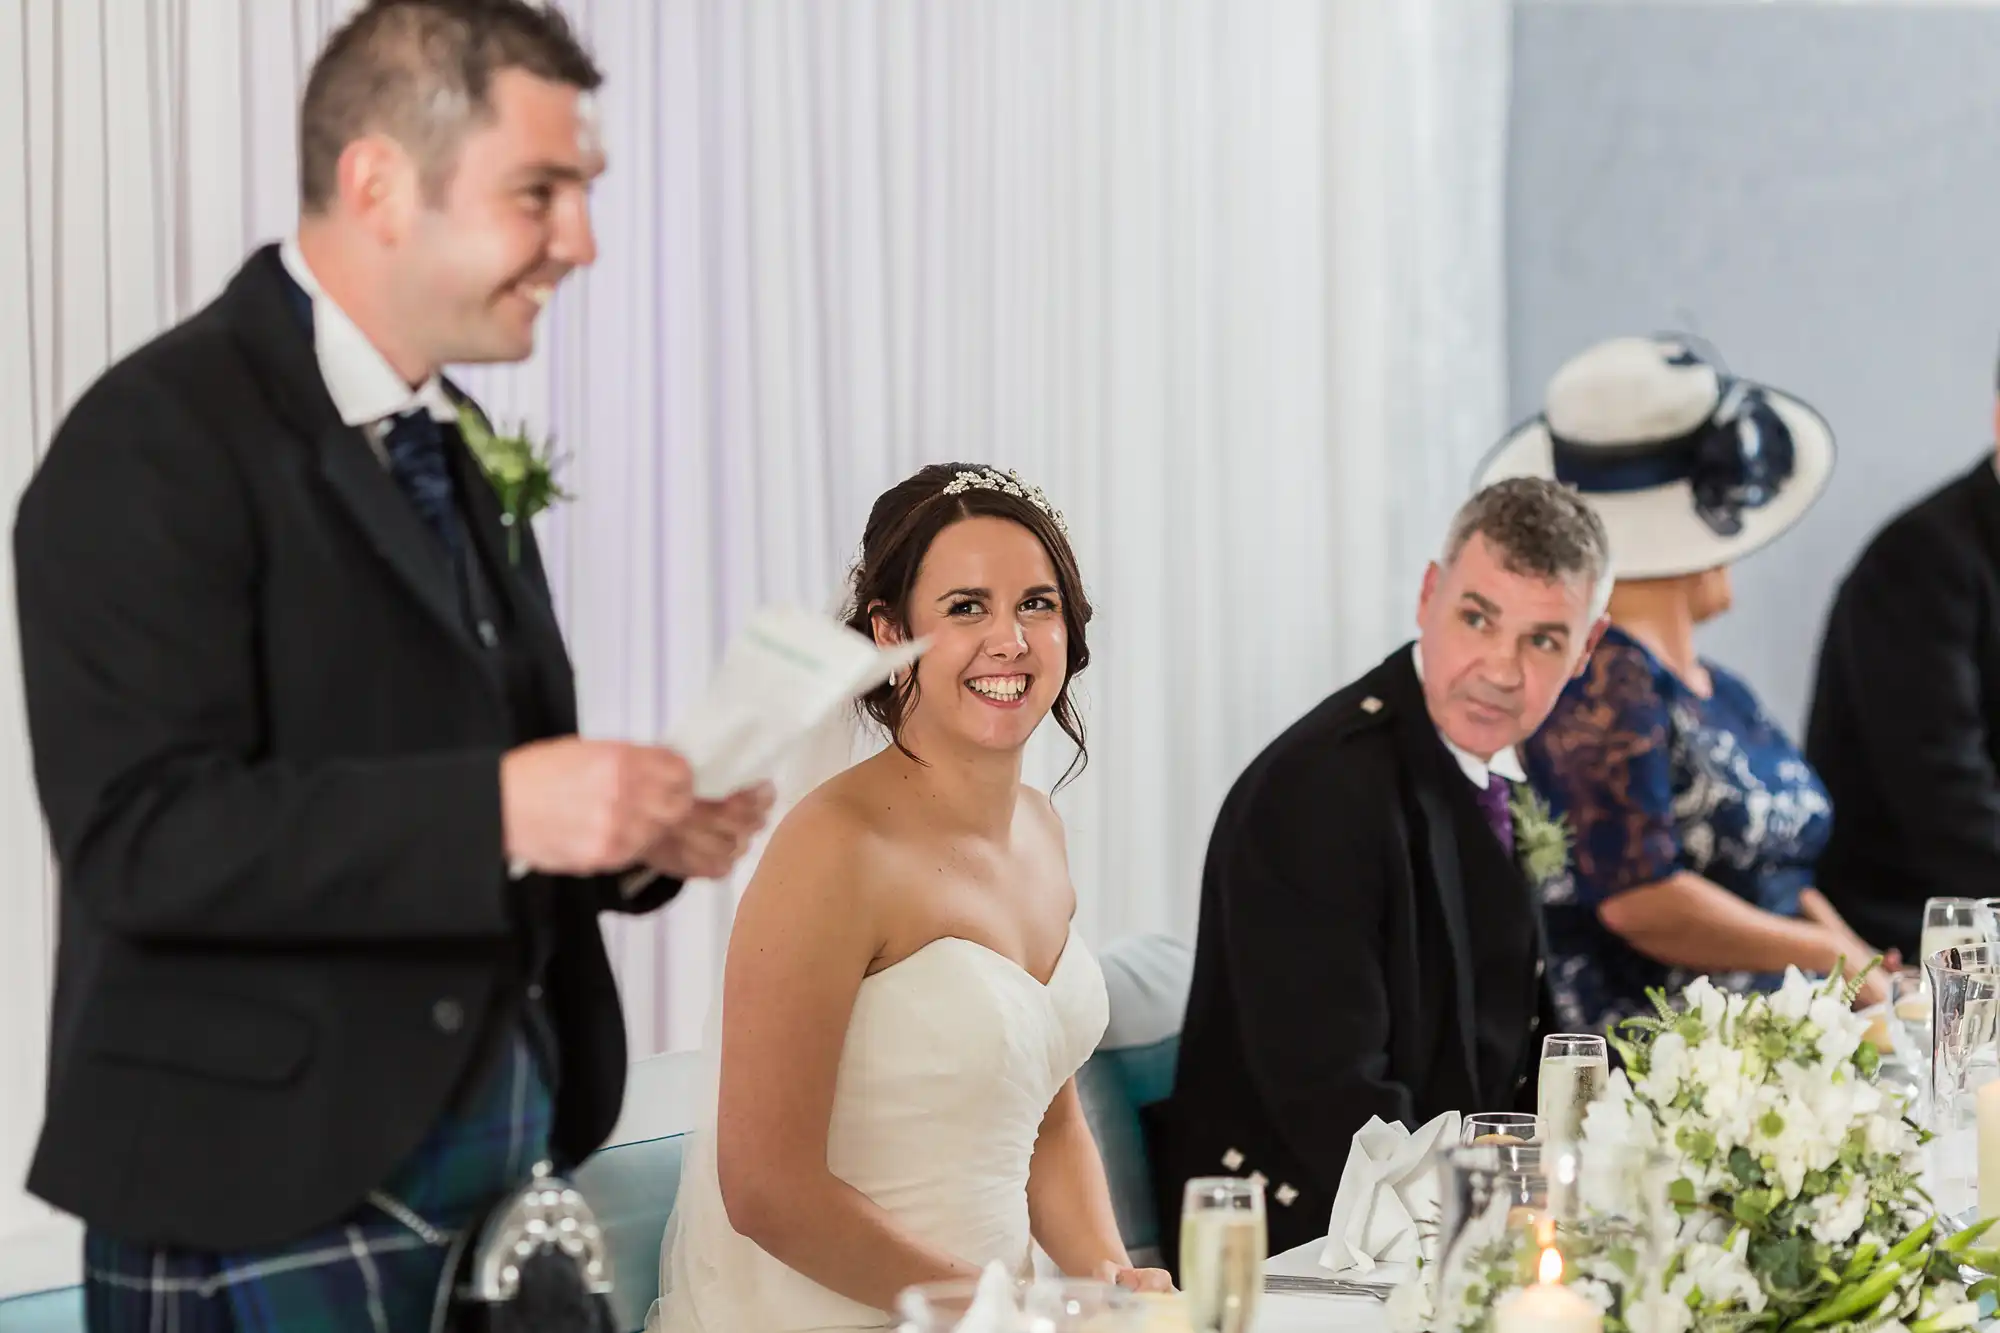 A bride in a white dress smiles at a wedding reception, while a man in a kilt holds a microphone next to her; other guests visible in the background.